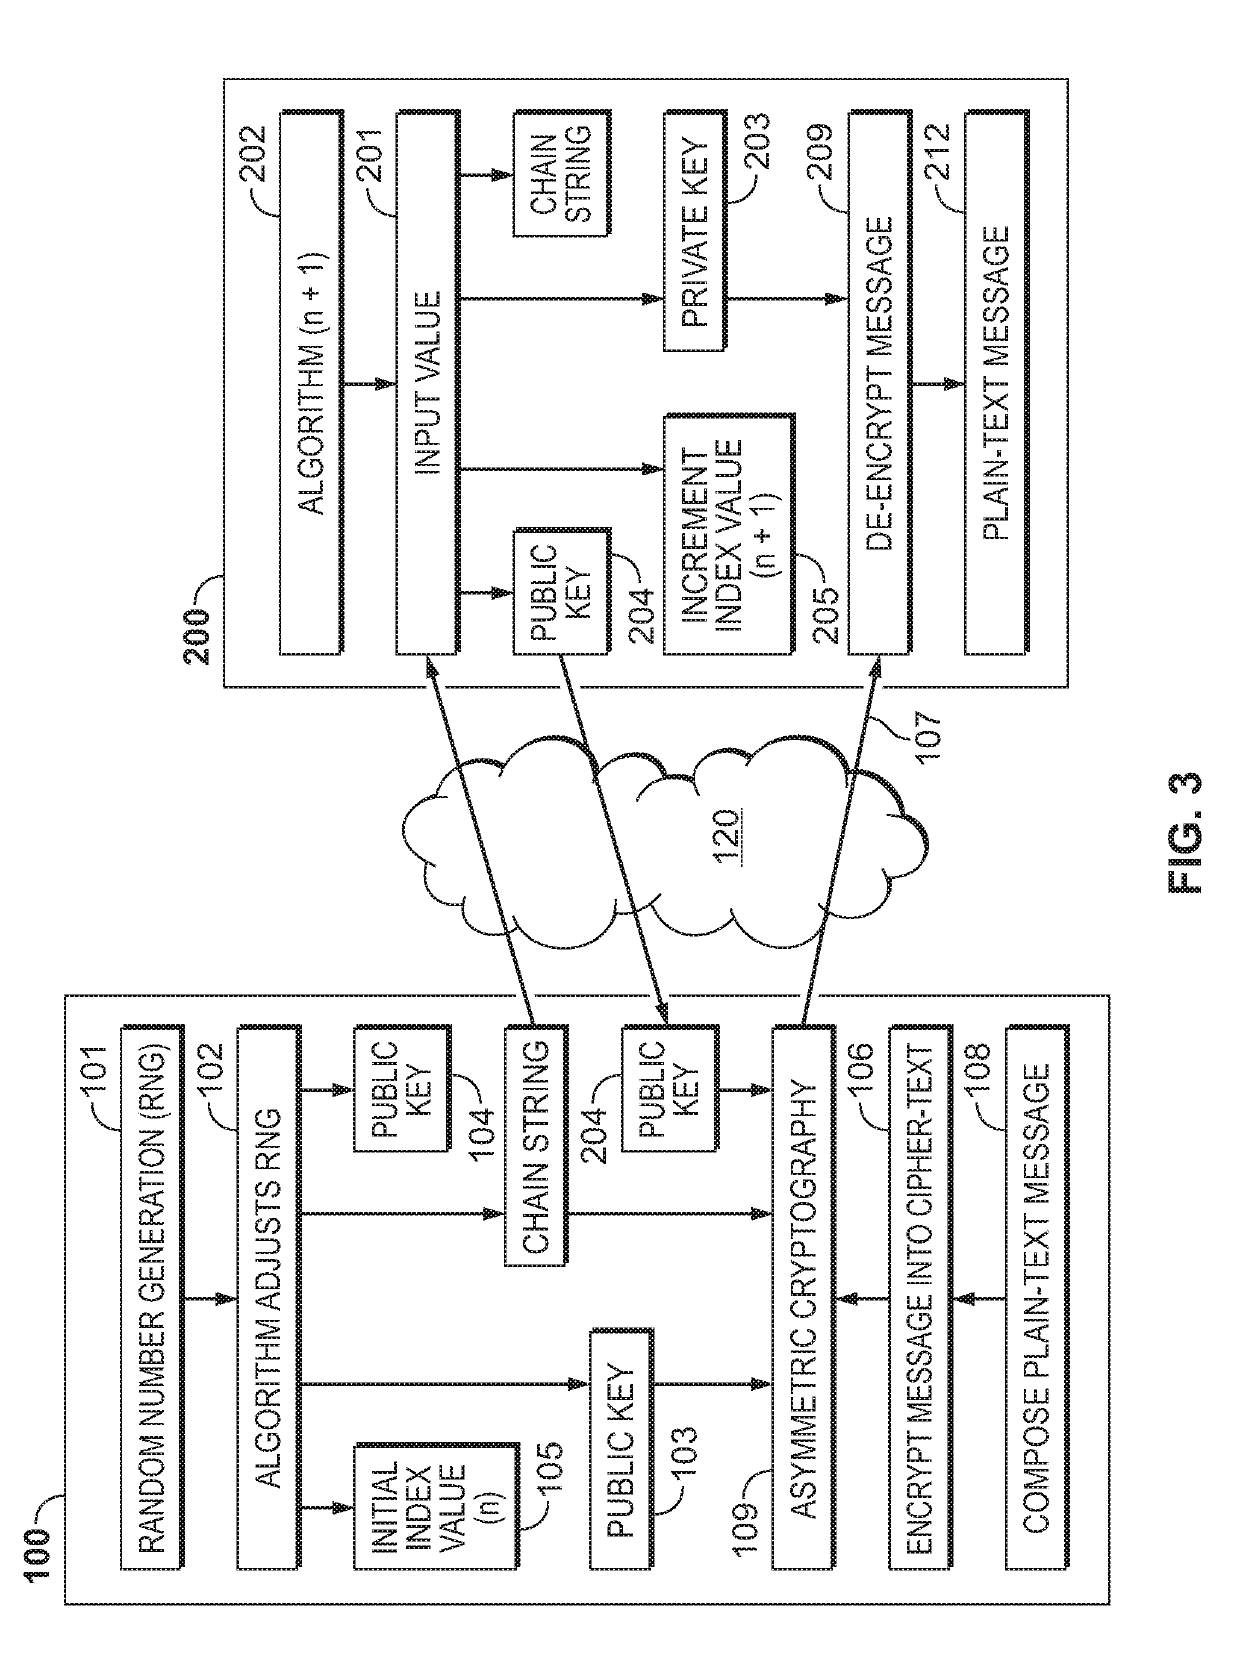 Method and apparatus for perfect forward secrecy using deterministic hierarchy